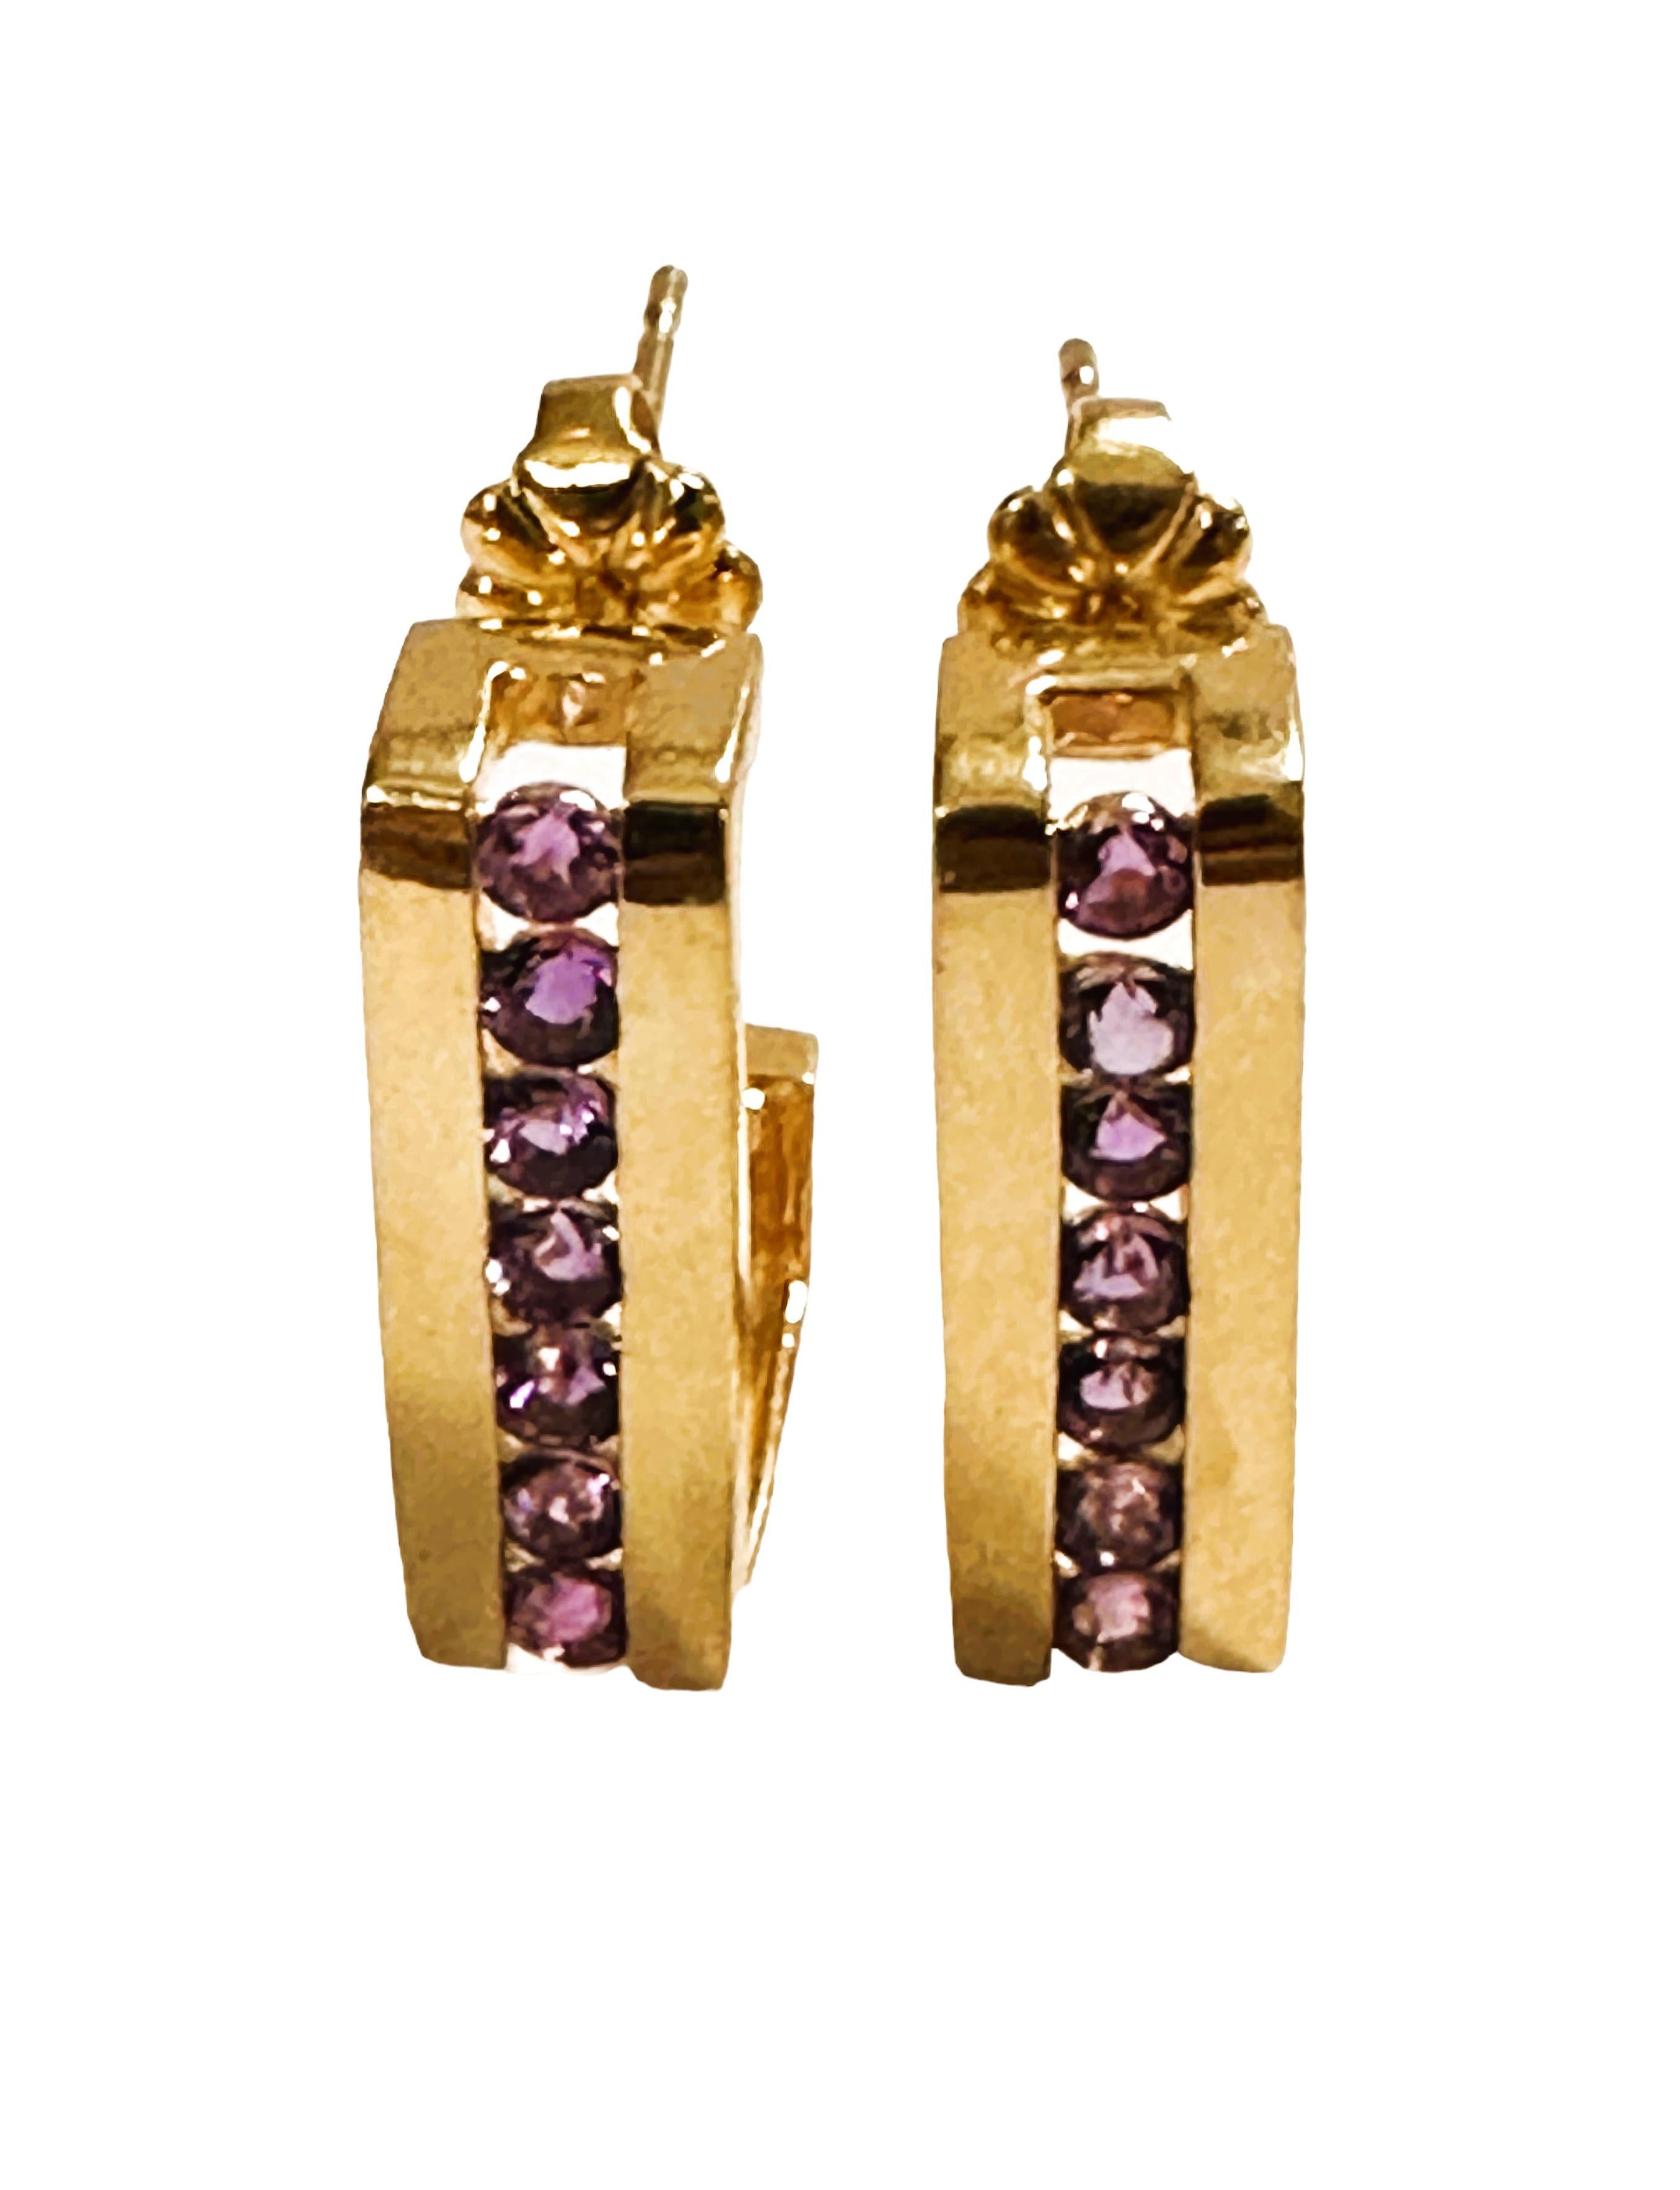 14k Yellow Gold 1.5 Carat Channel Set Amethyst Earrings with Appraisal For Sale 1